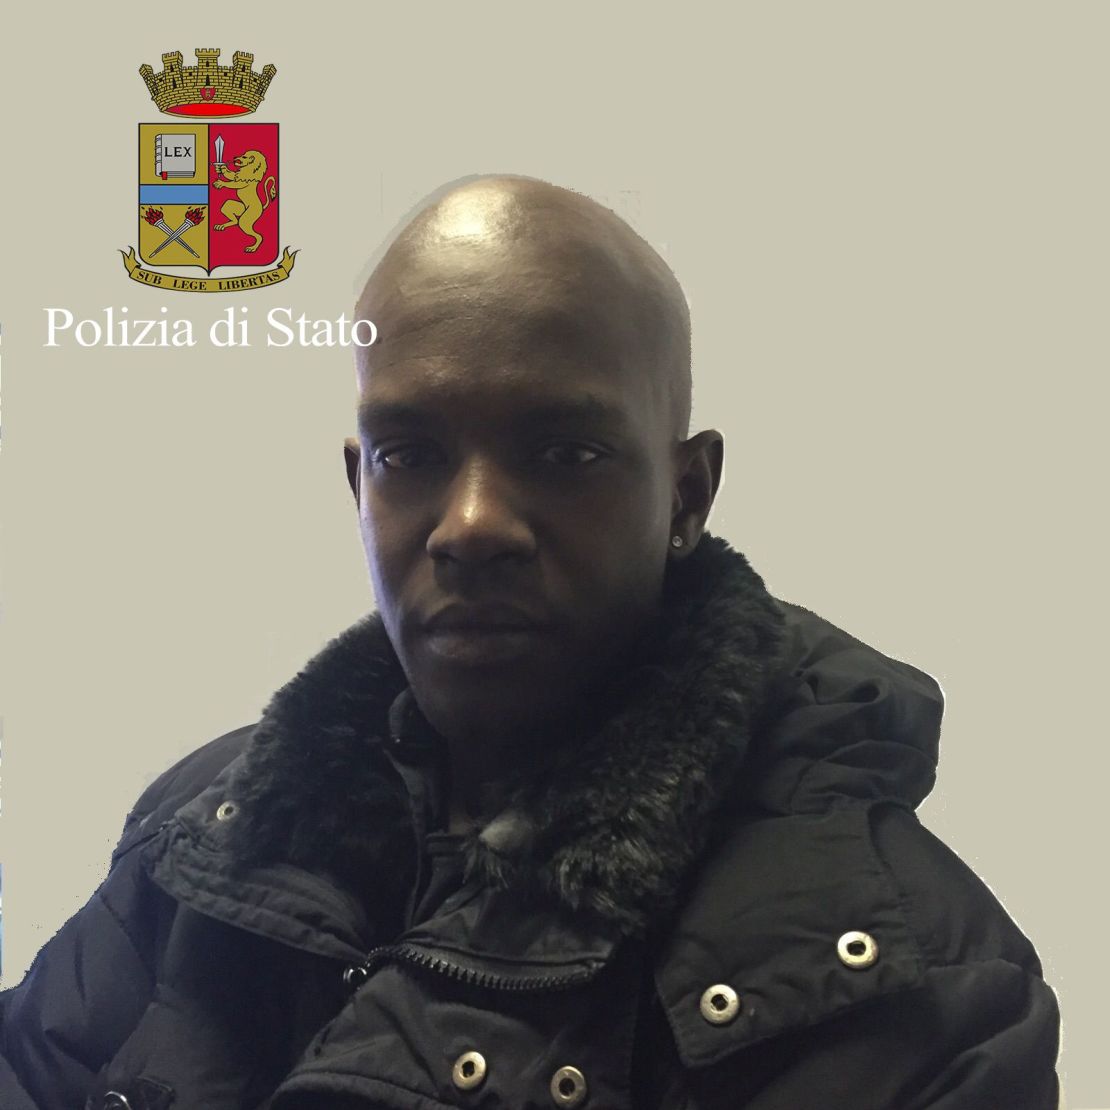 A photograph released by Italian police of suspect Cheikh Tidiane Diaw.